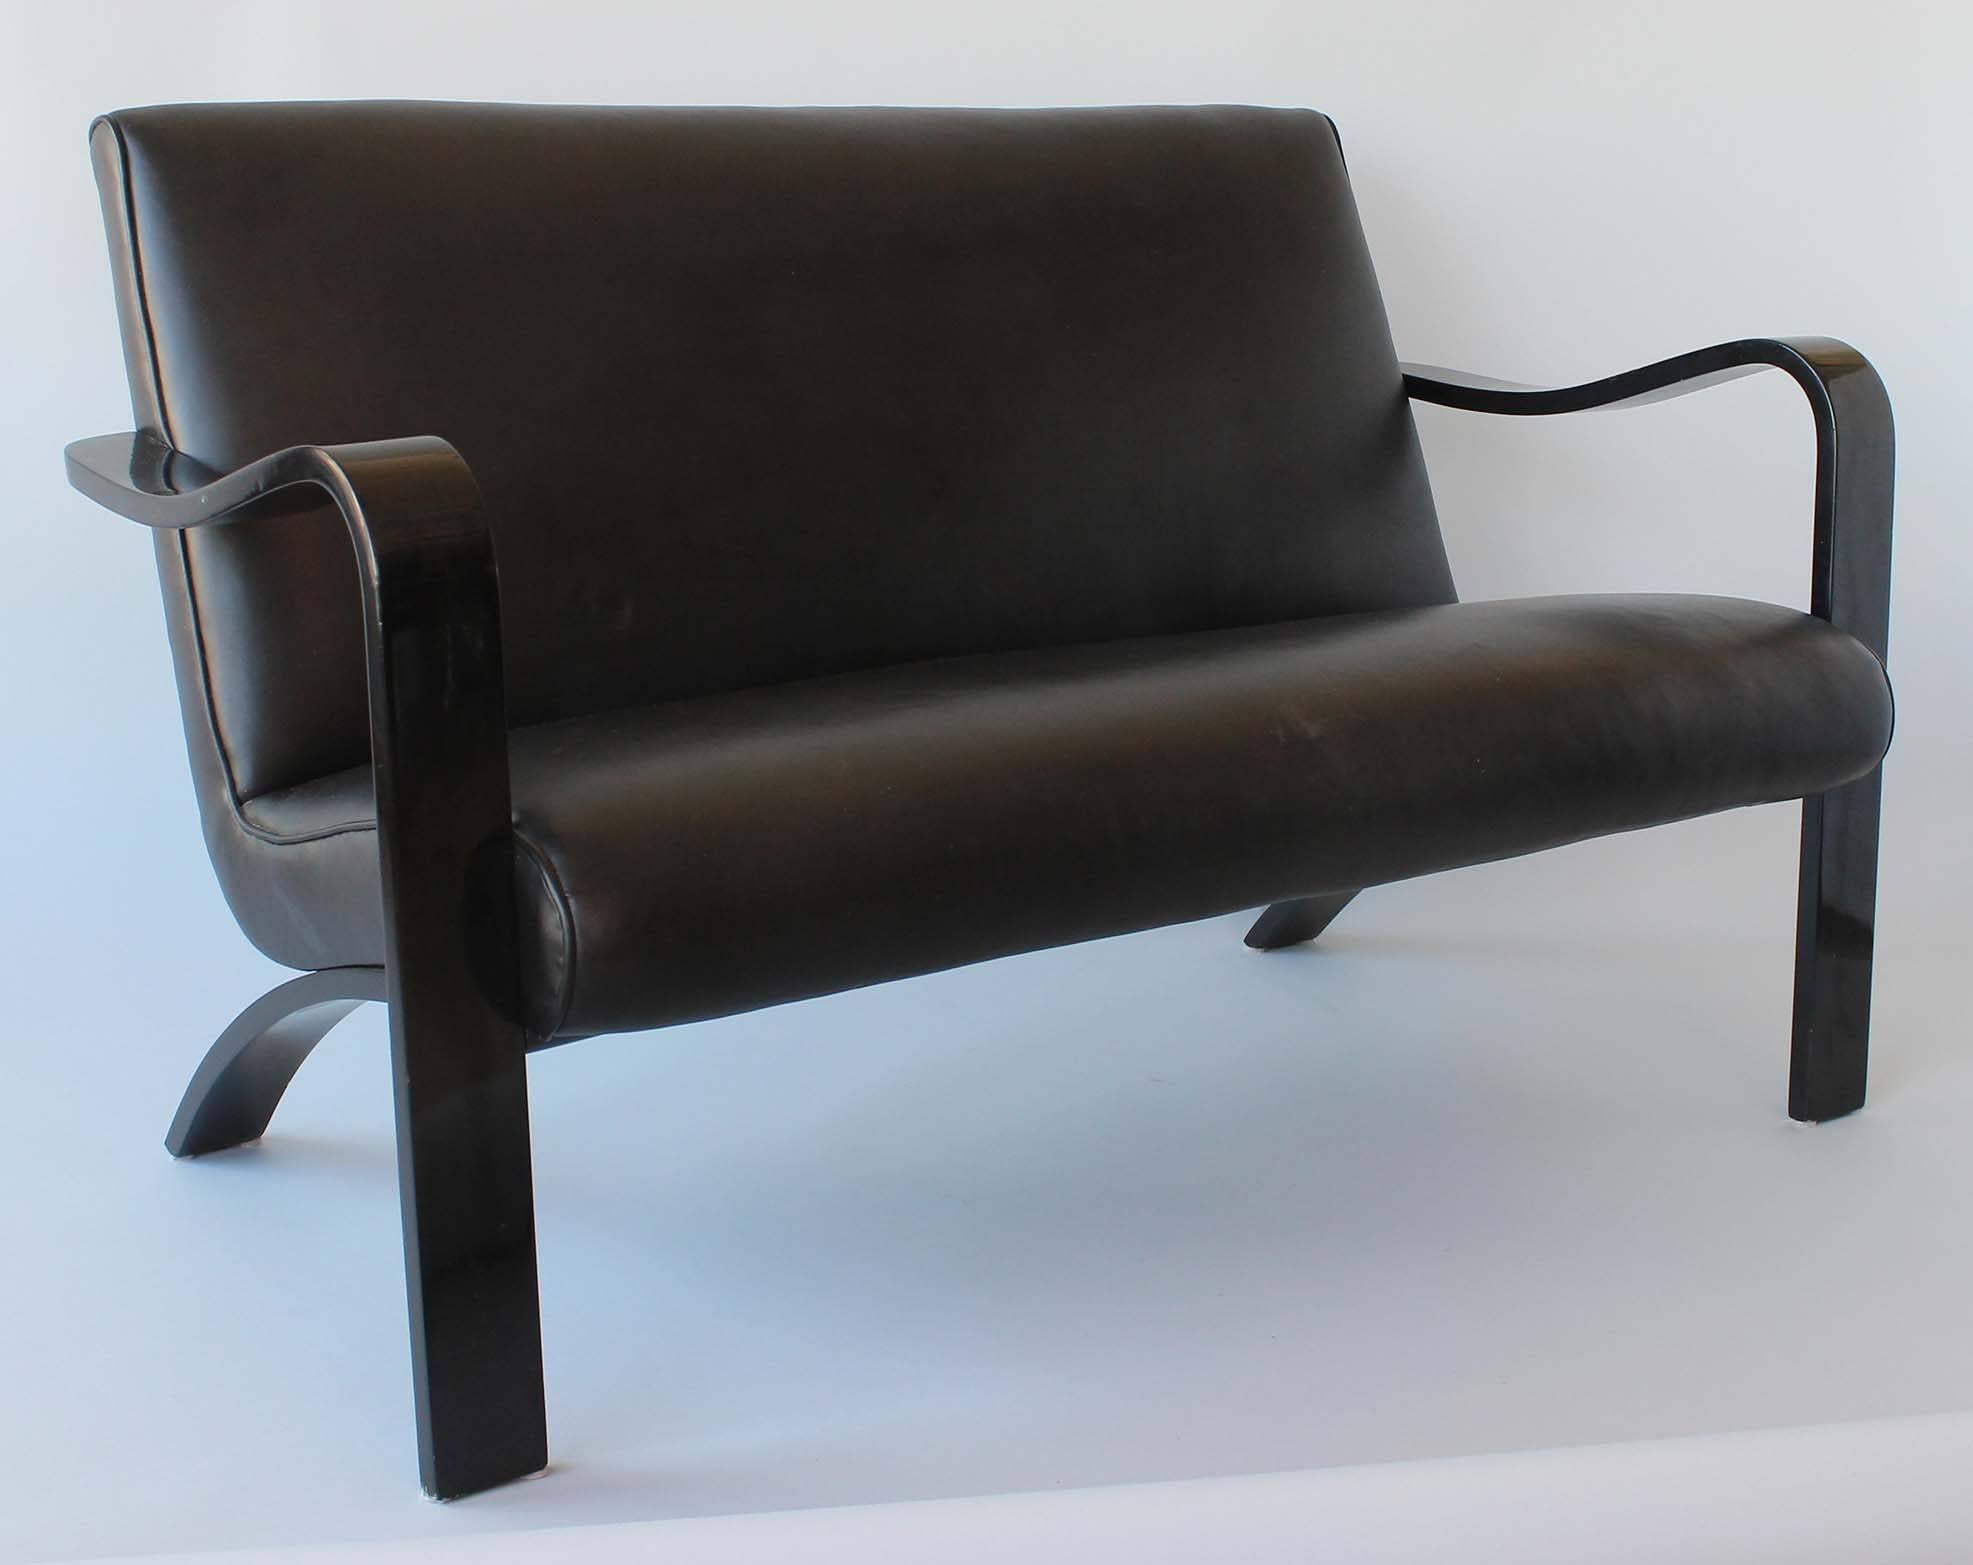 A midcentury bentwood sofa or love seat finished in black lacquer, with faux leather upholstery by Thonet.